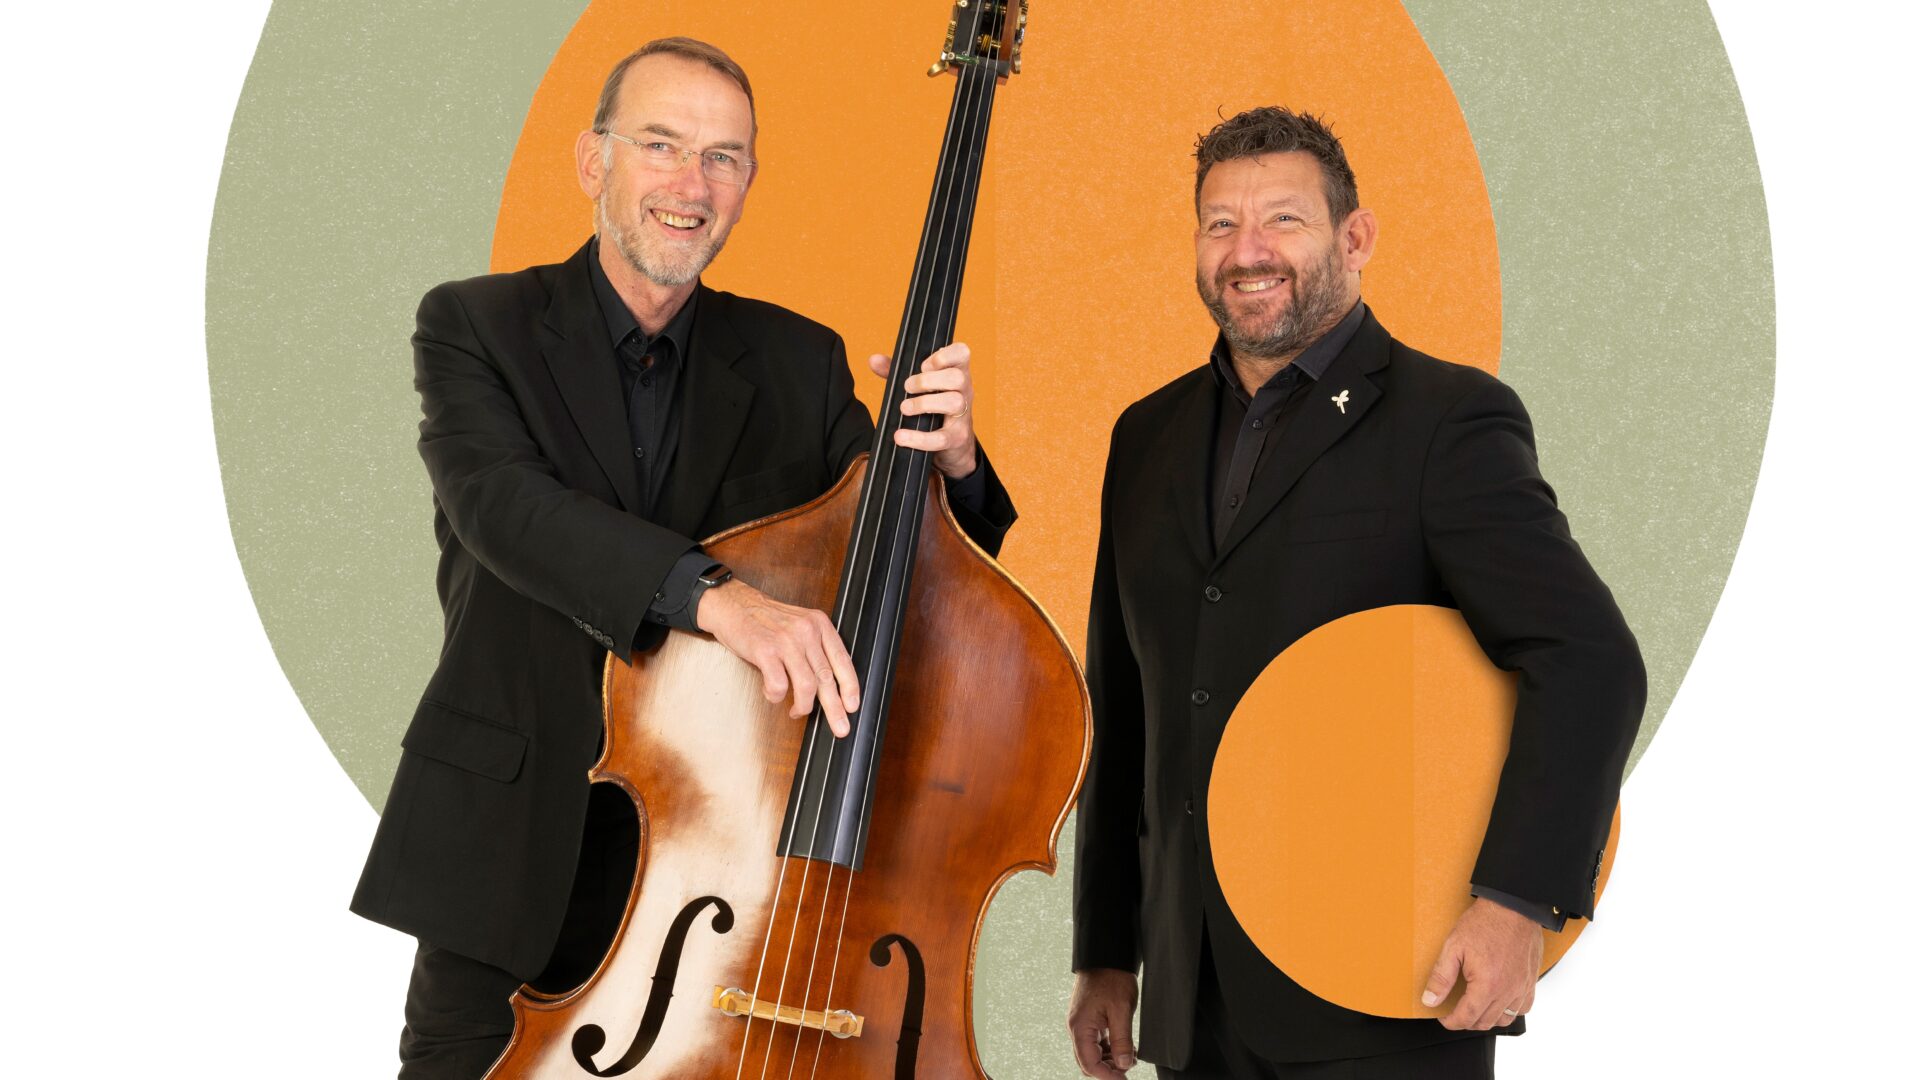 Two BSO musicians, one holding a double bass